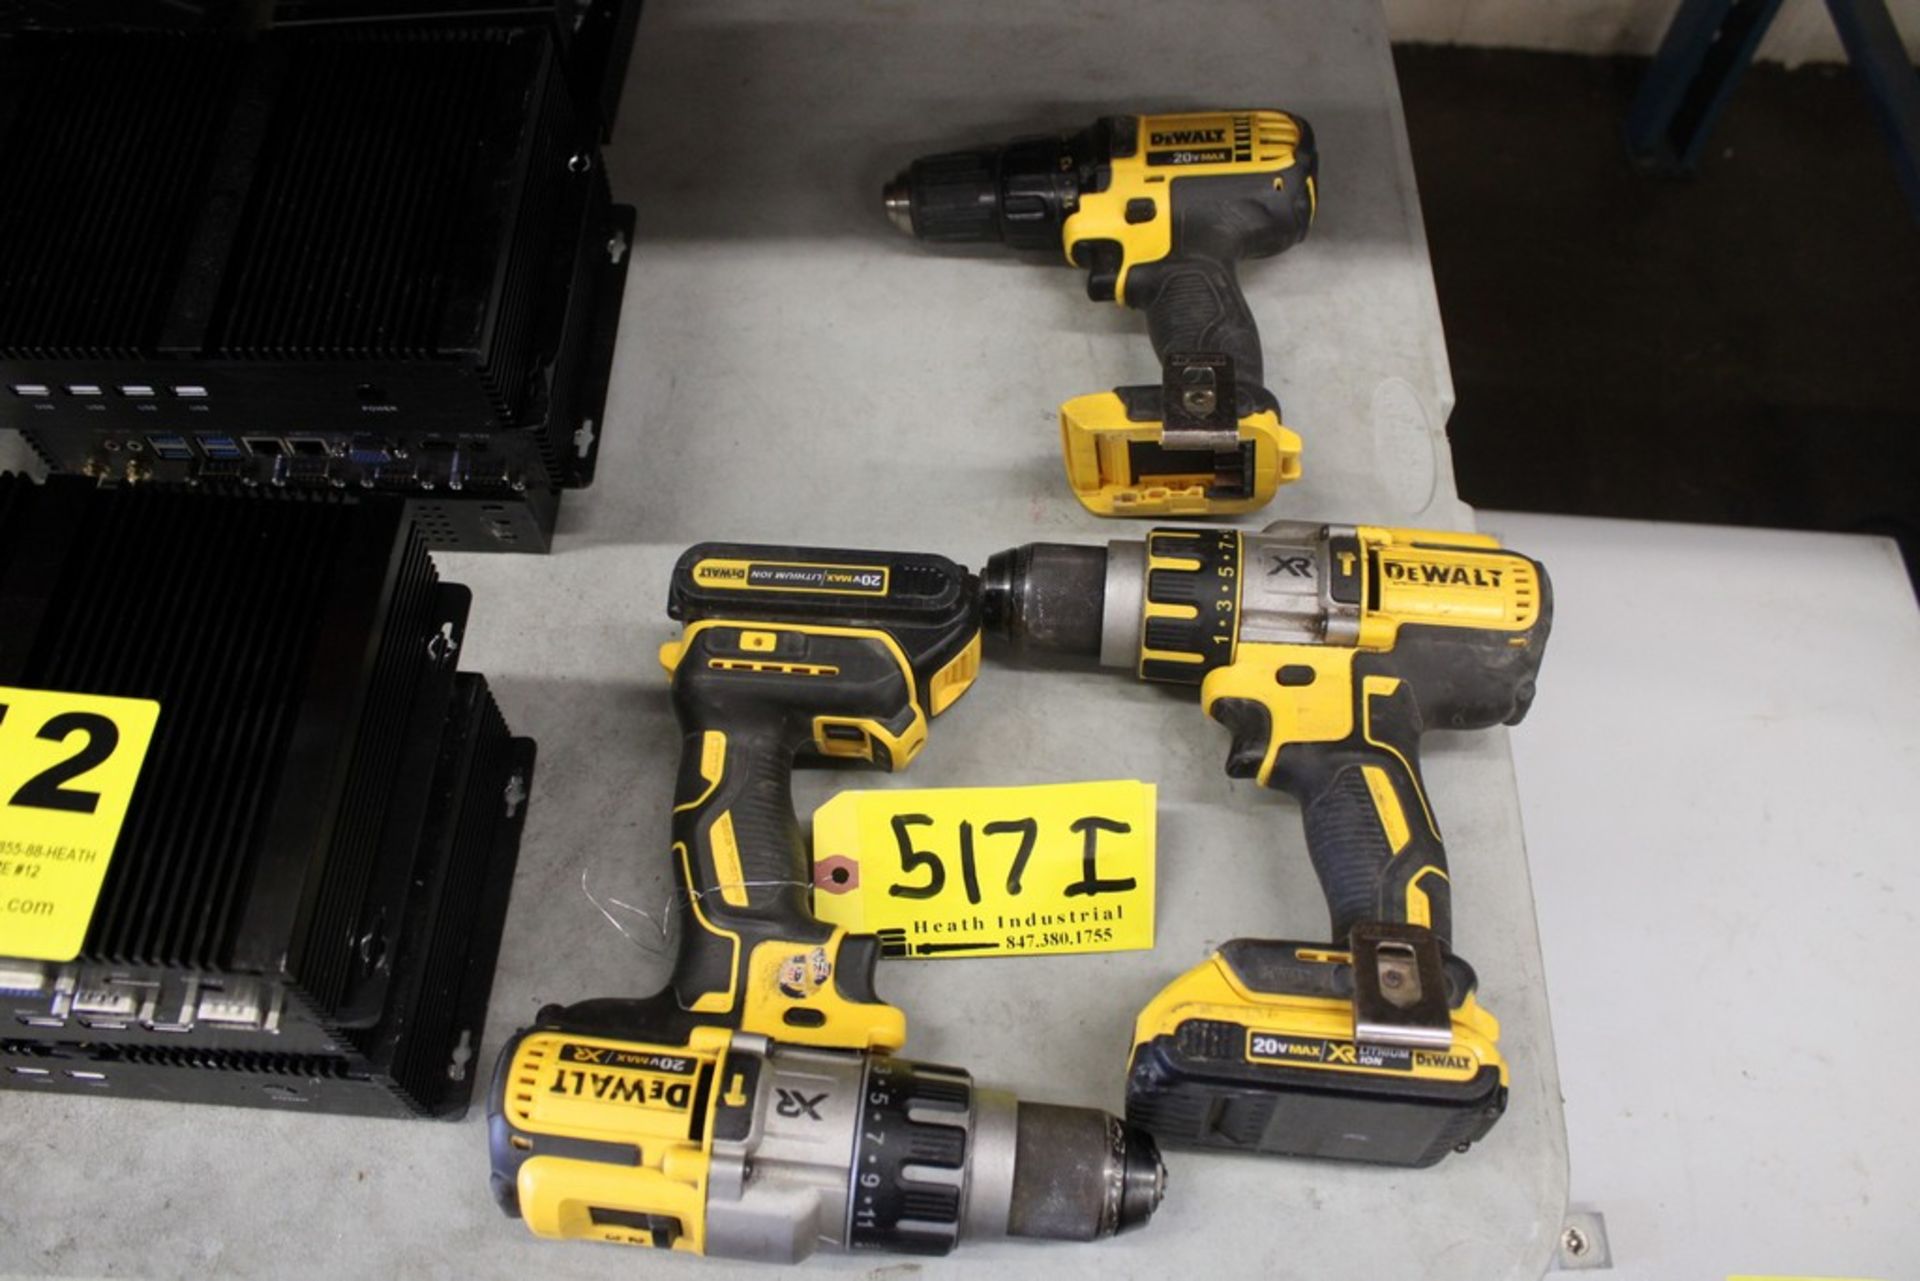 (3) DEWALT DCD995 20V CORDLESS HAMMER DRILL / DRIVERS WITH (2) BATTERIES, NO CHARGER